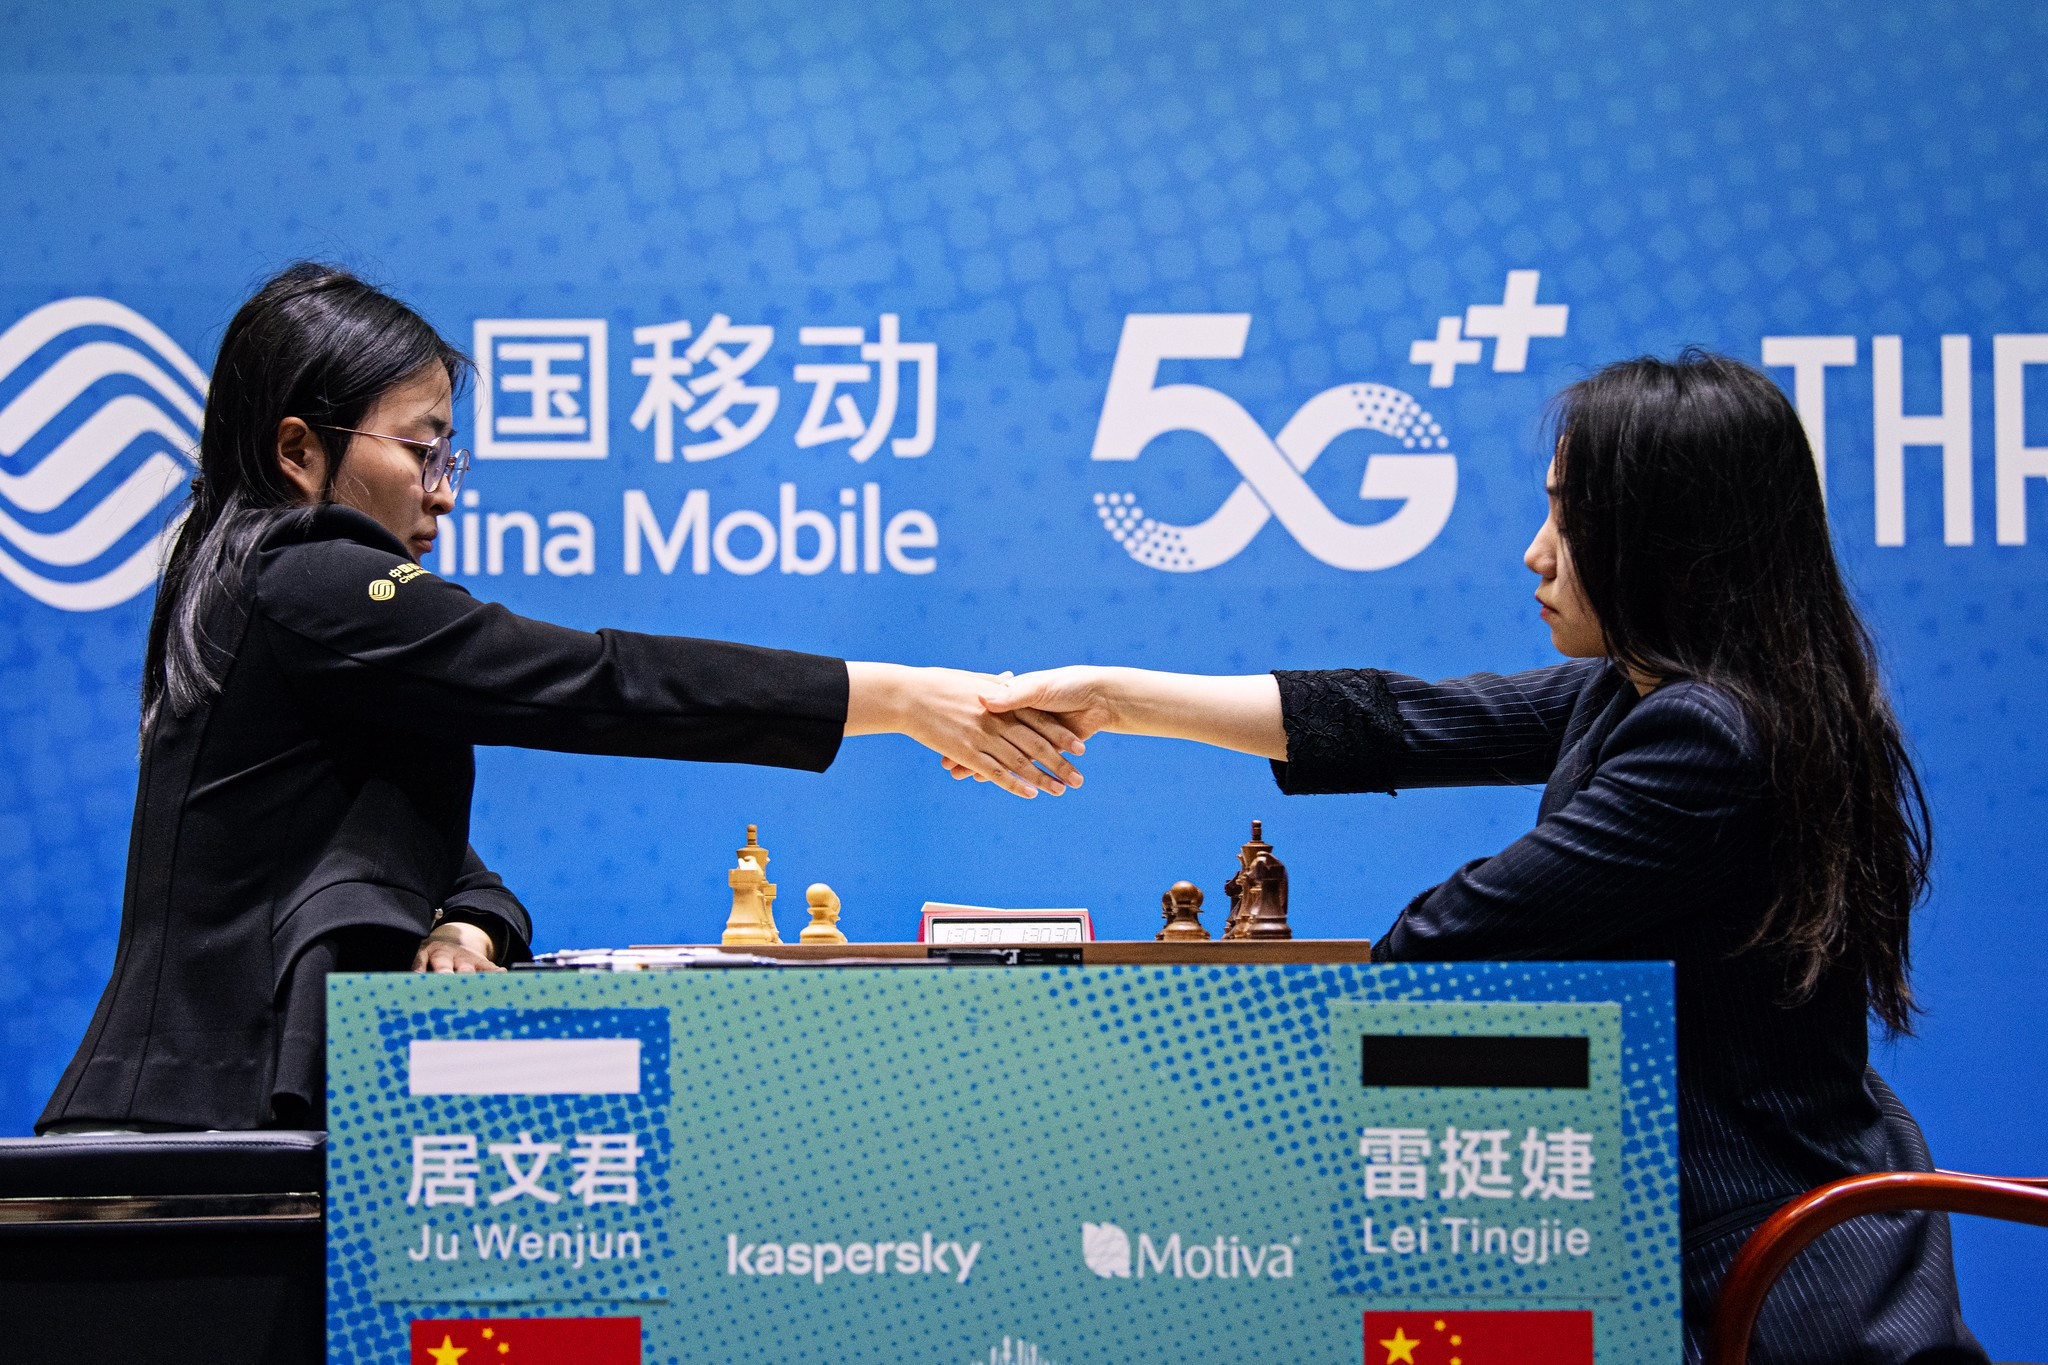 Ju Wenjun, left, and Lei Tingjie shake hands after game two of the FIDE Women's World Championship Match ended in a draw ©FIDE/Stev Bonhage